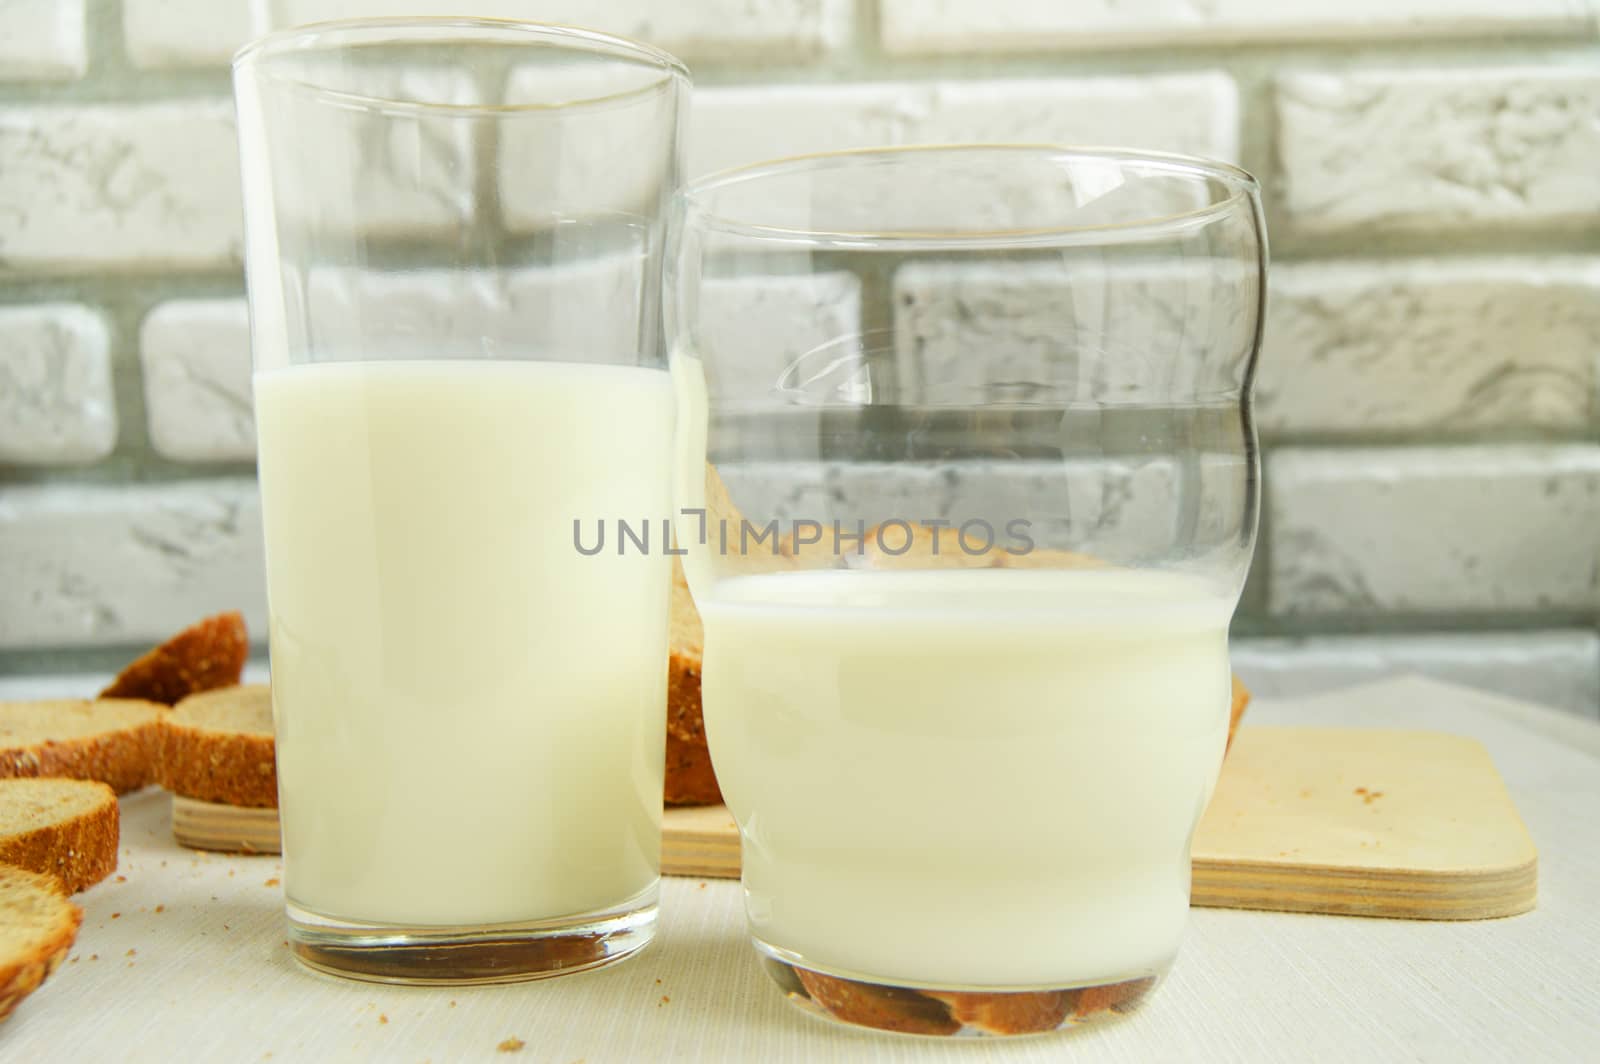 Two glasses of milk are on the table, Breakfast for the family, healthy eating concept, world health day.